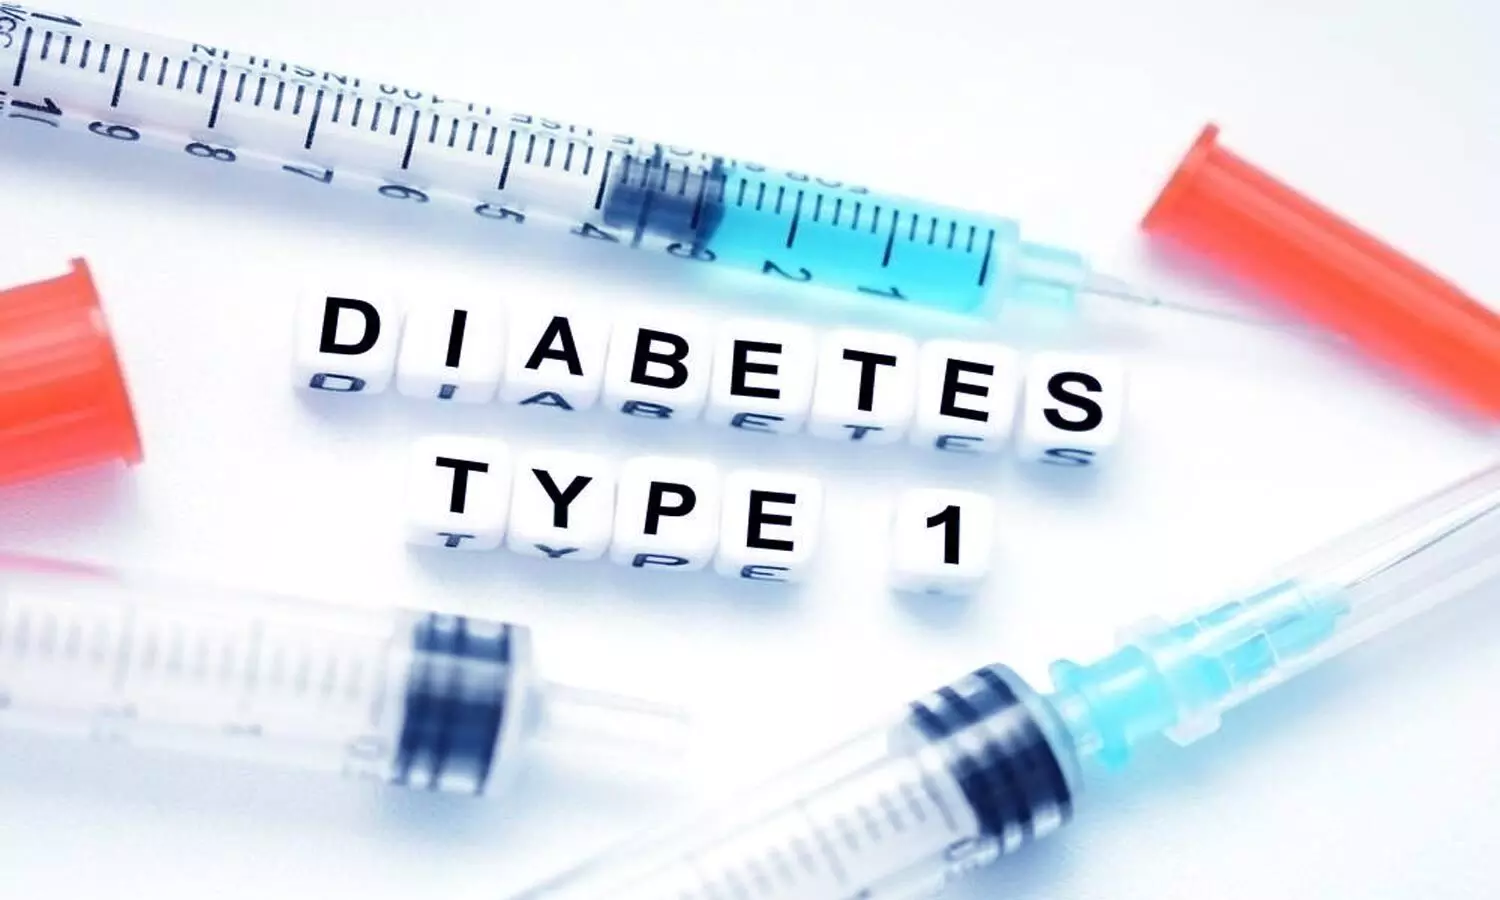 Insulin and  glucagon combo- Novel approach for blood sugar control in diabetes